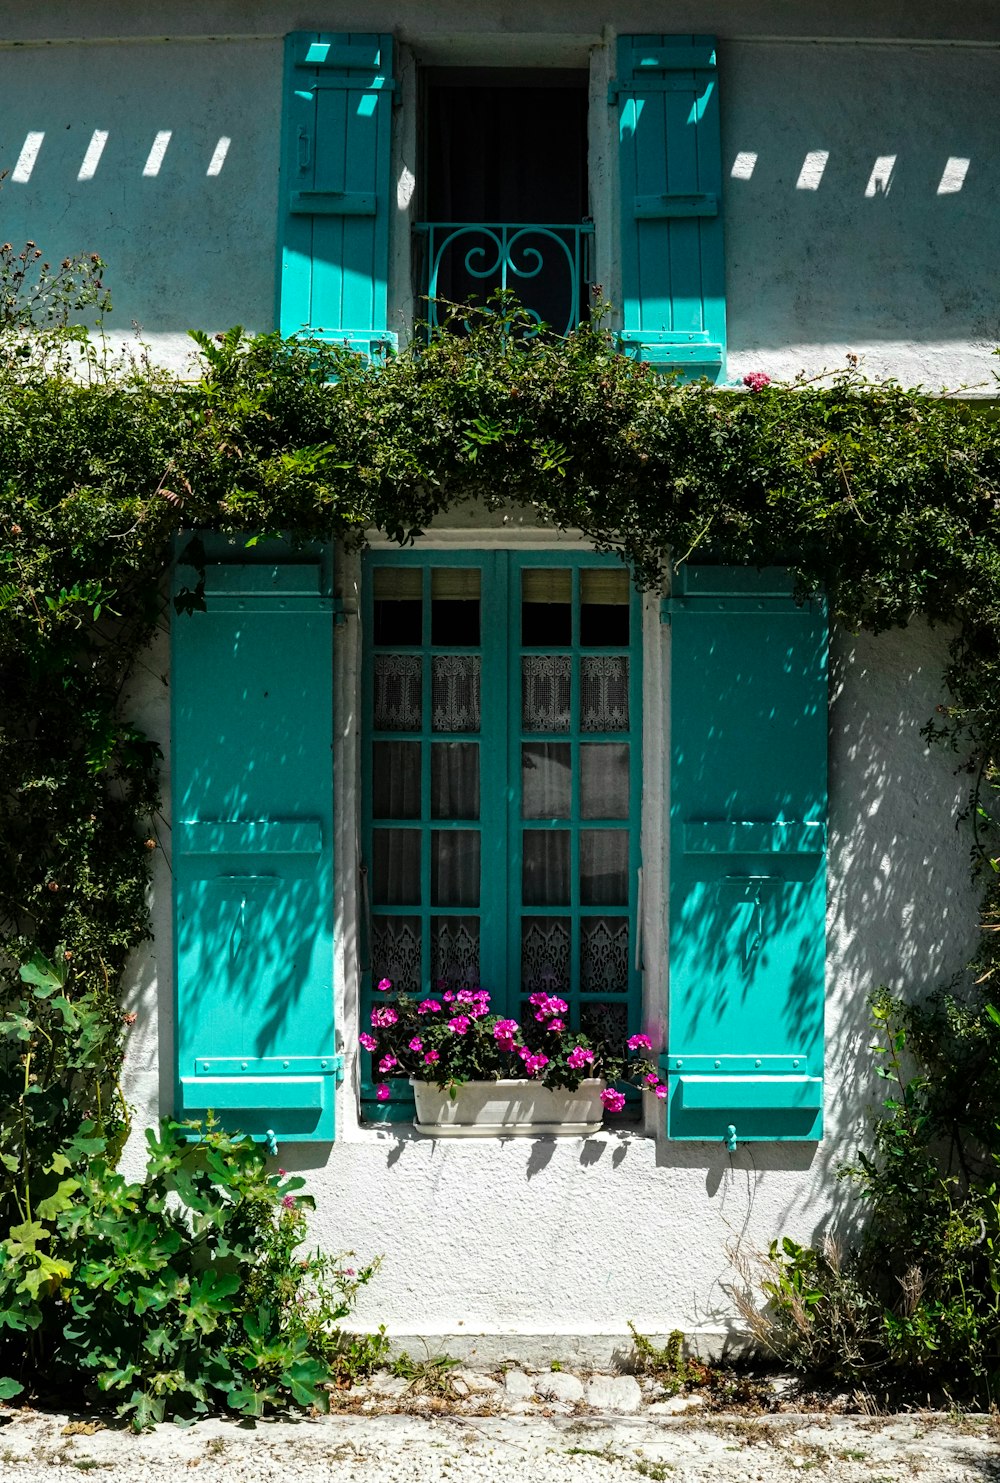 a window with green shutters and flowers in a window box